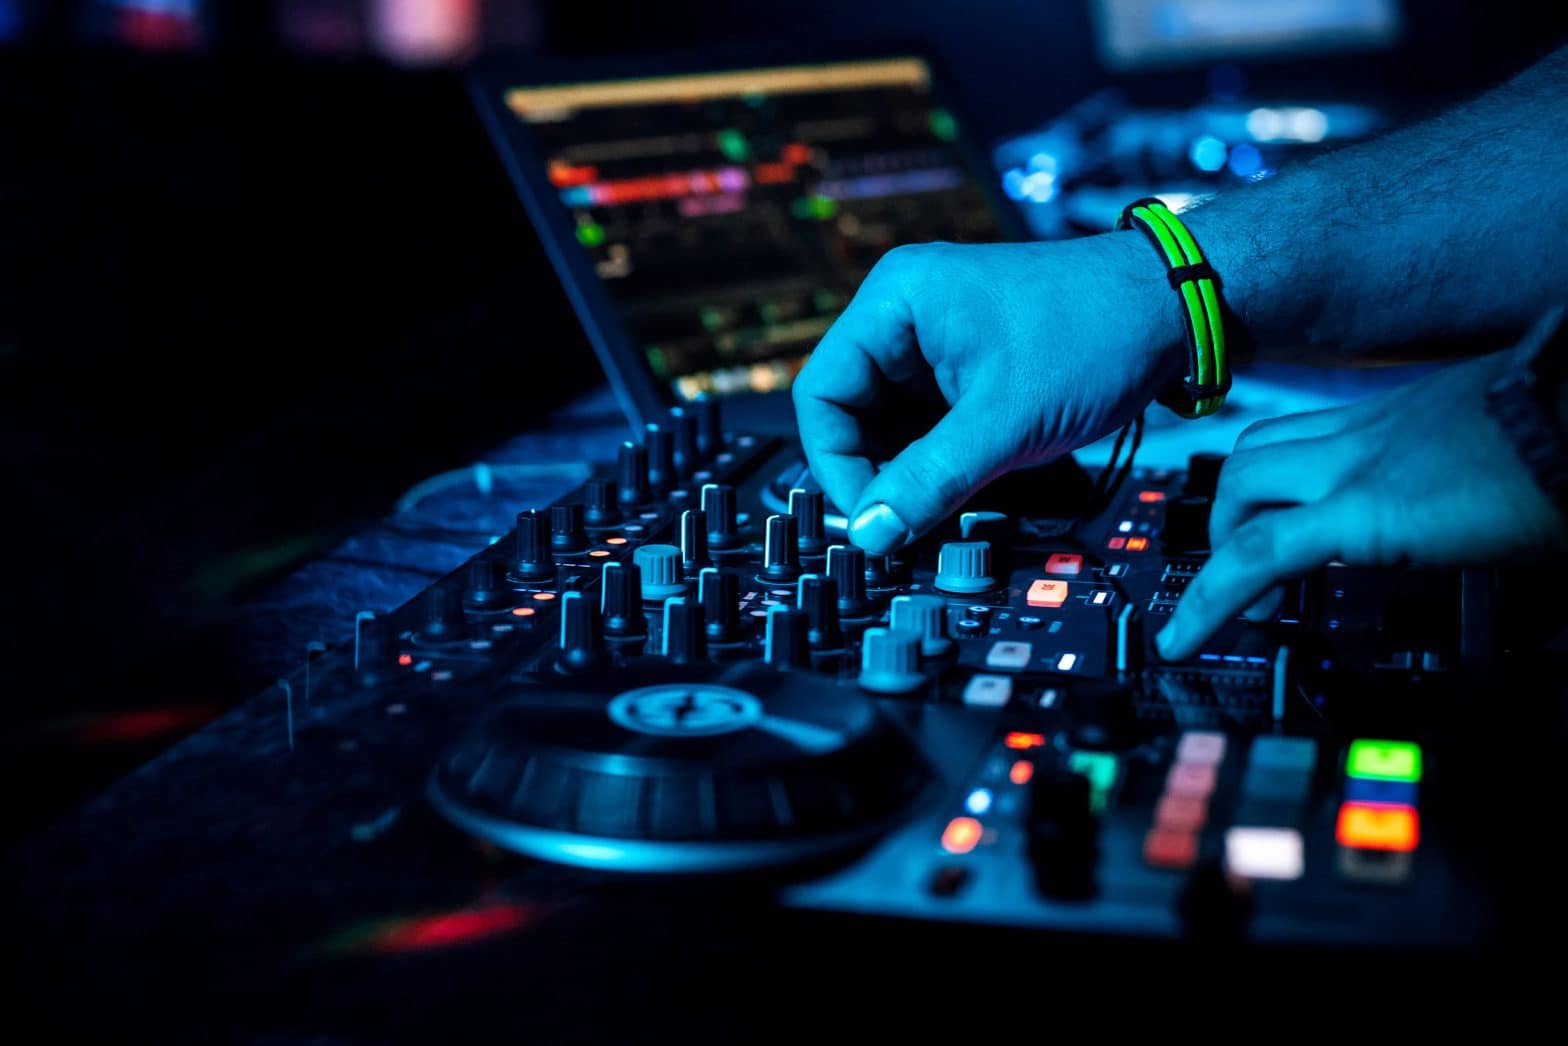 DJ hand mixes electronic music on a professional mixer in a nightclub at a concert